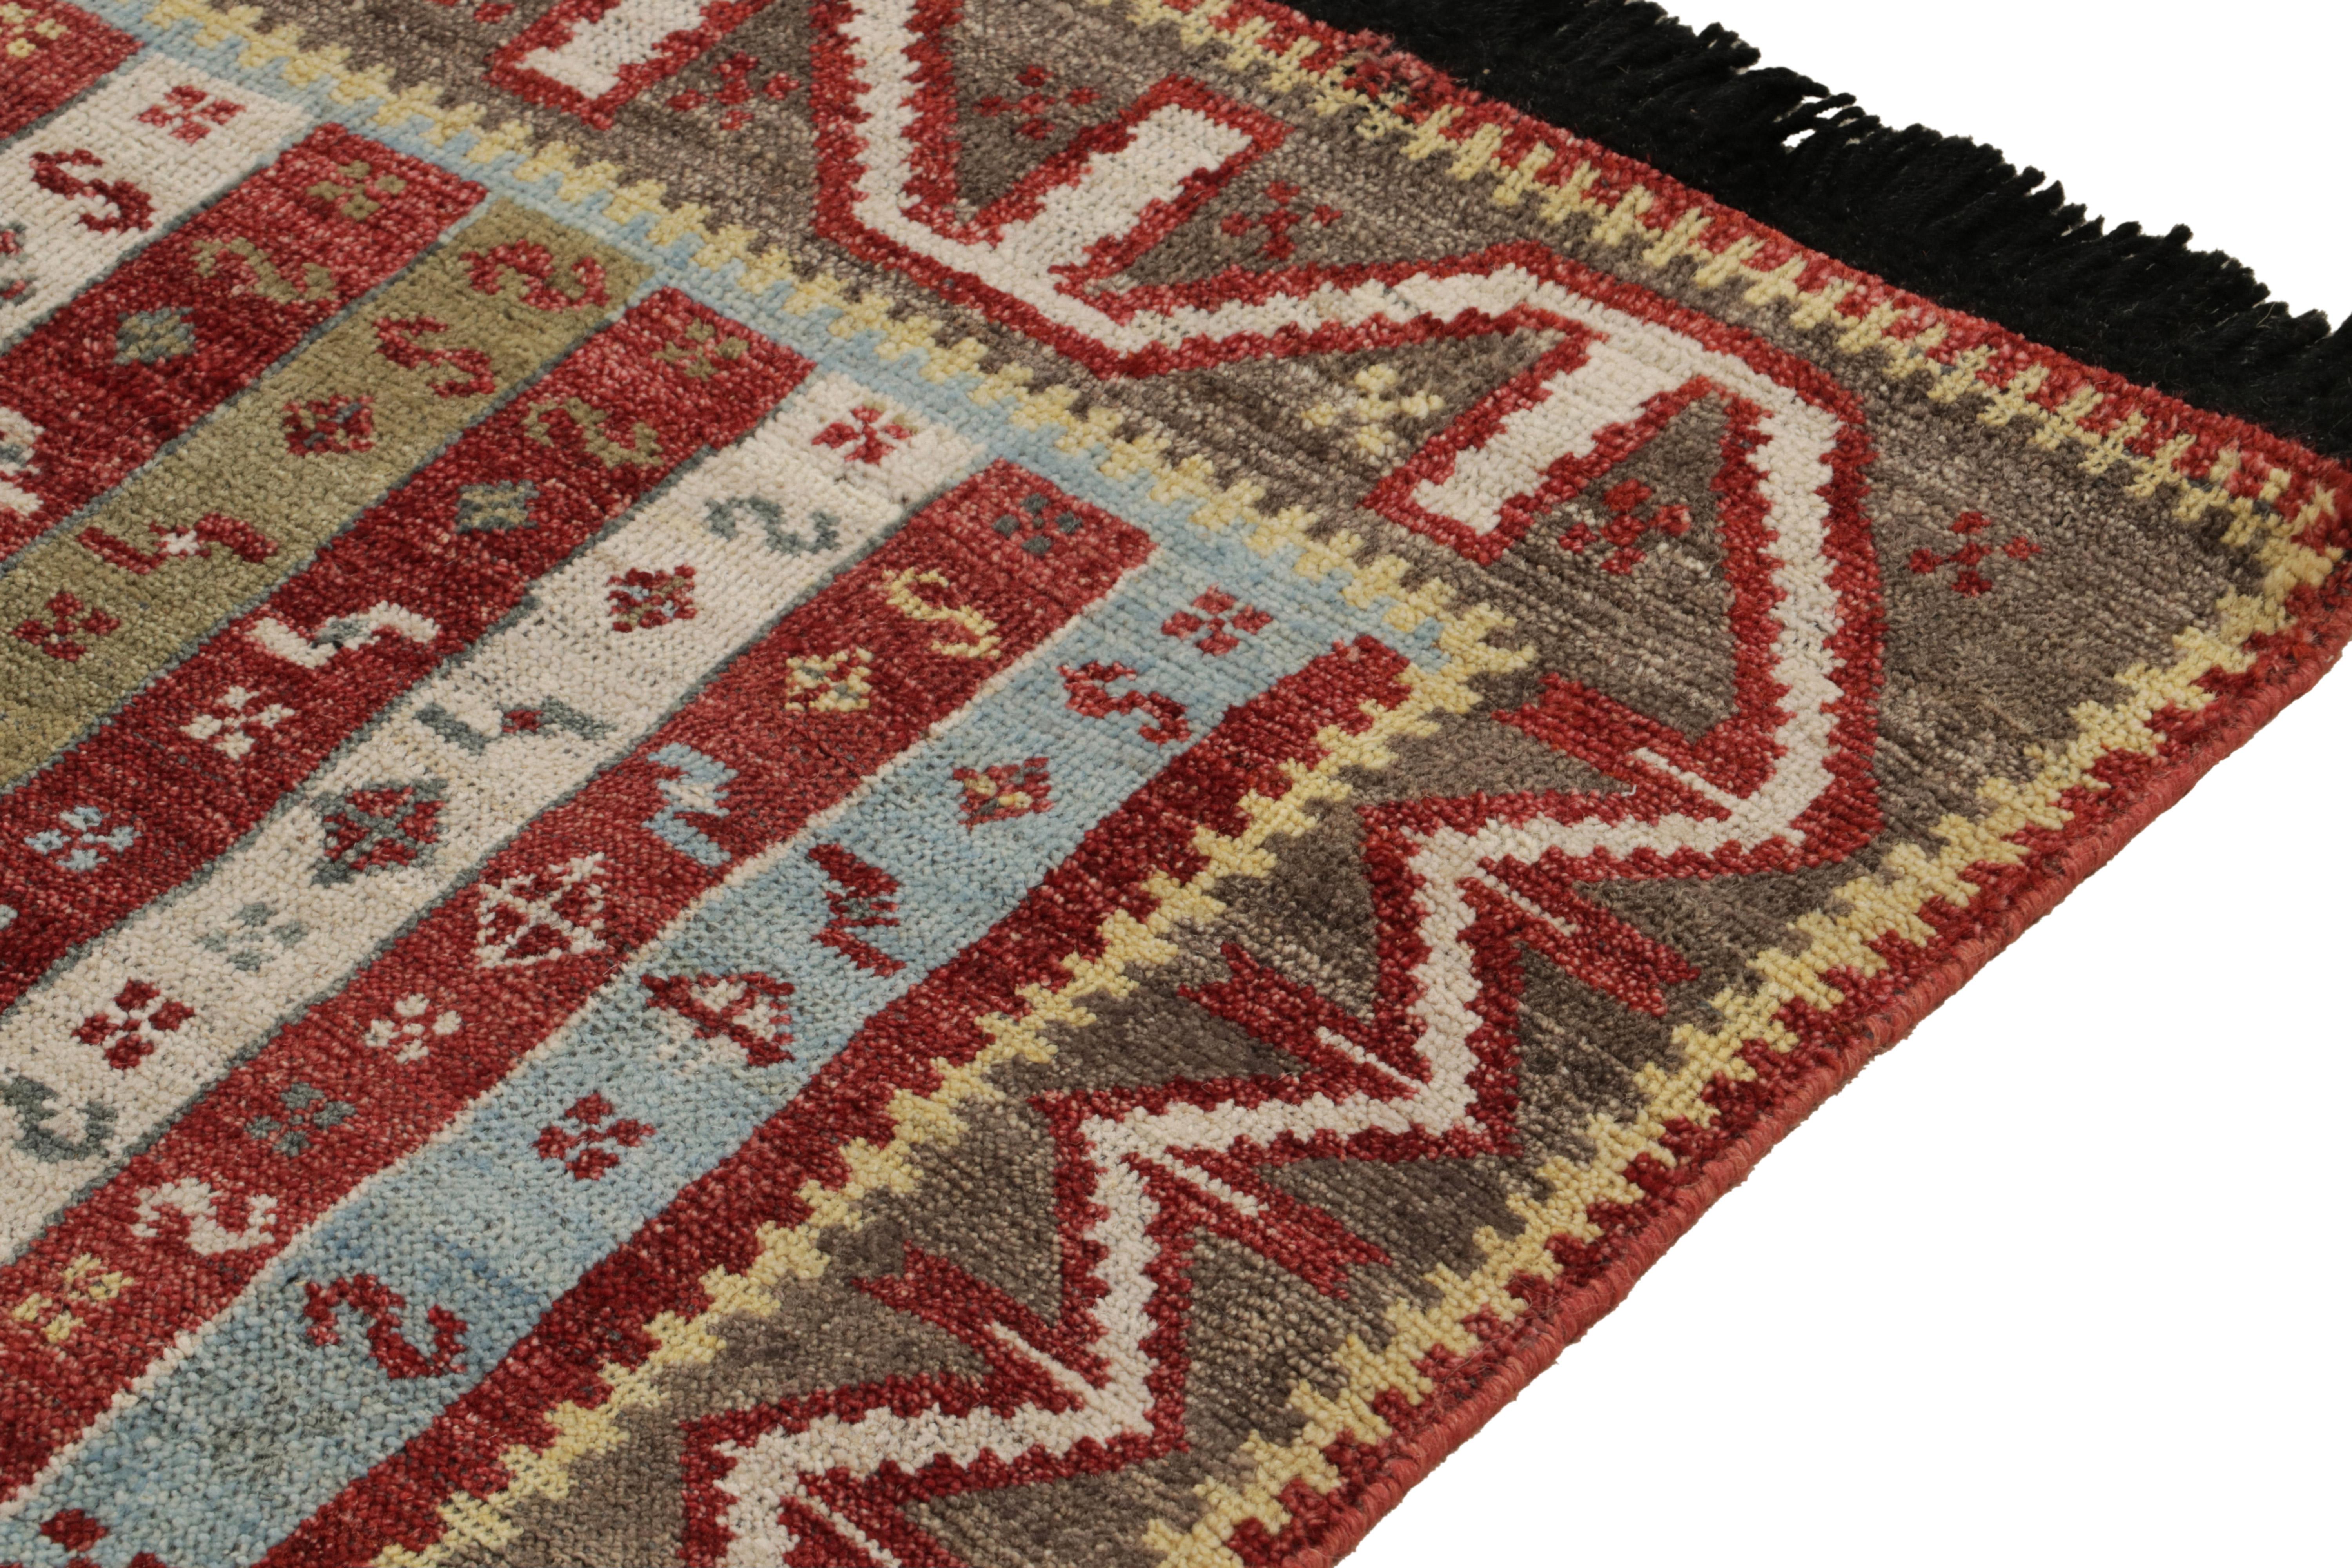 Contemporary Rug & Kilim's Tribal Style runner in Multicolor Stripes, Geometric Pattern